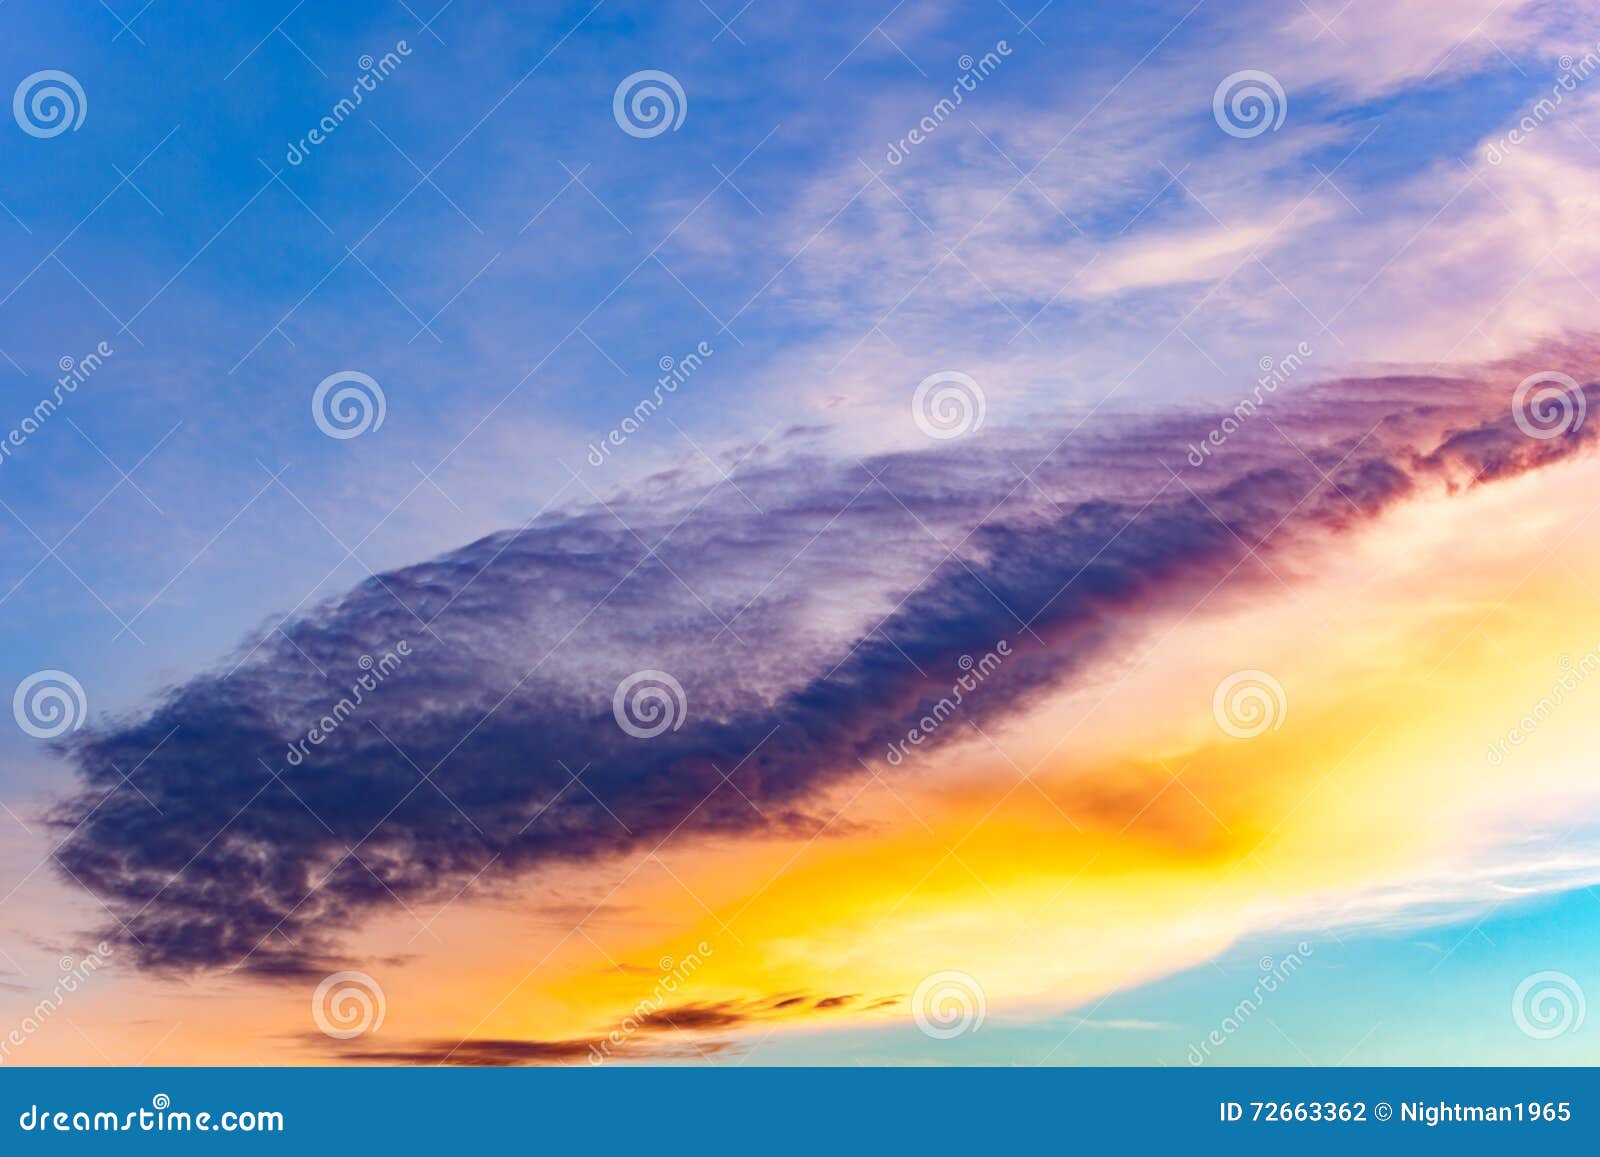 Multicolor sky at sunset stock photo. Image of environment - 72663362